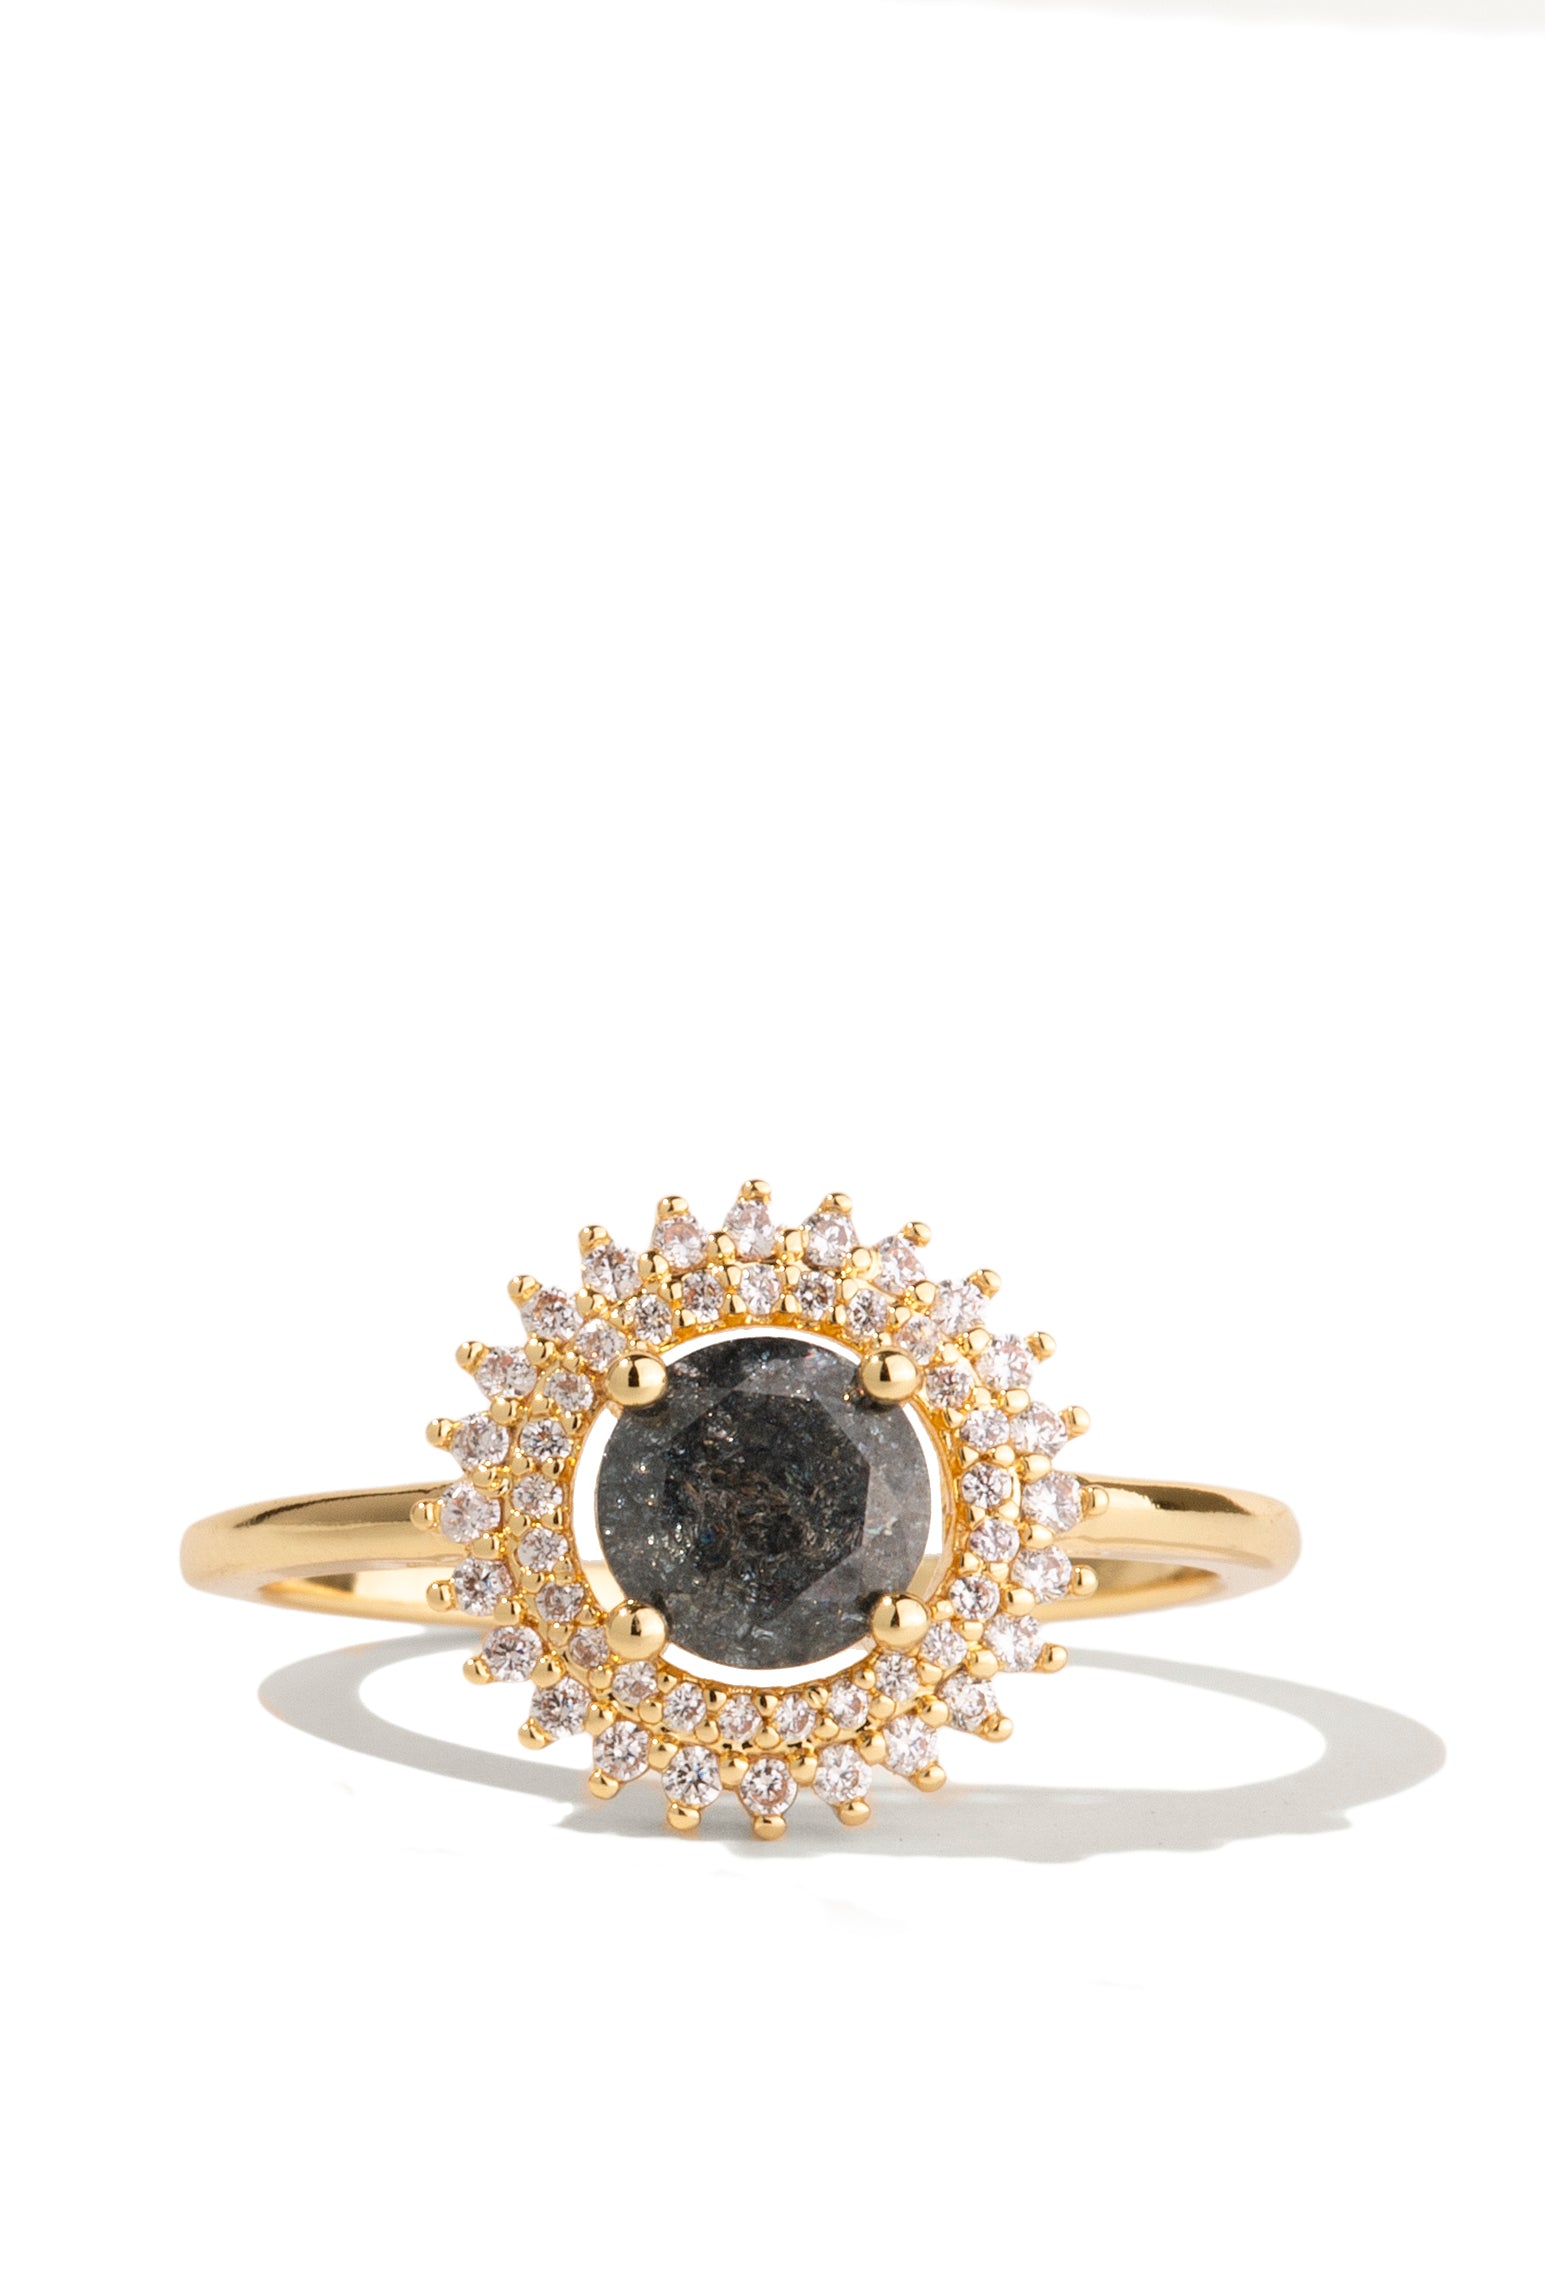 Gold Ring Featuring a Black Ice Crystal + Double Halo of Crystals | Art Deco by Oomiay